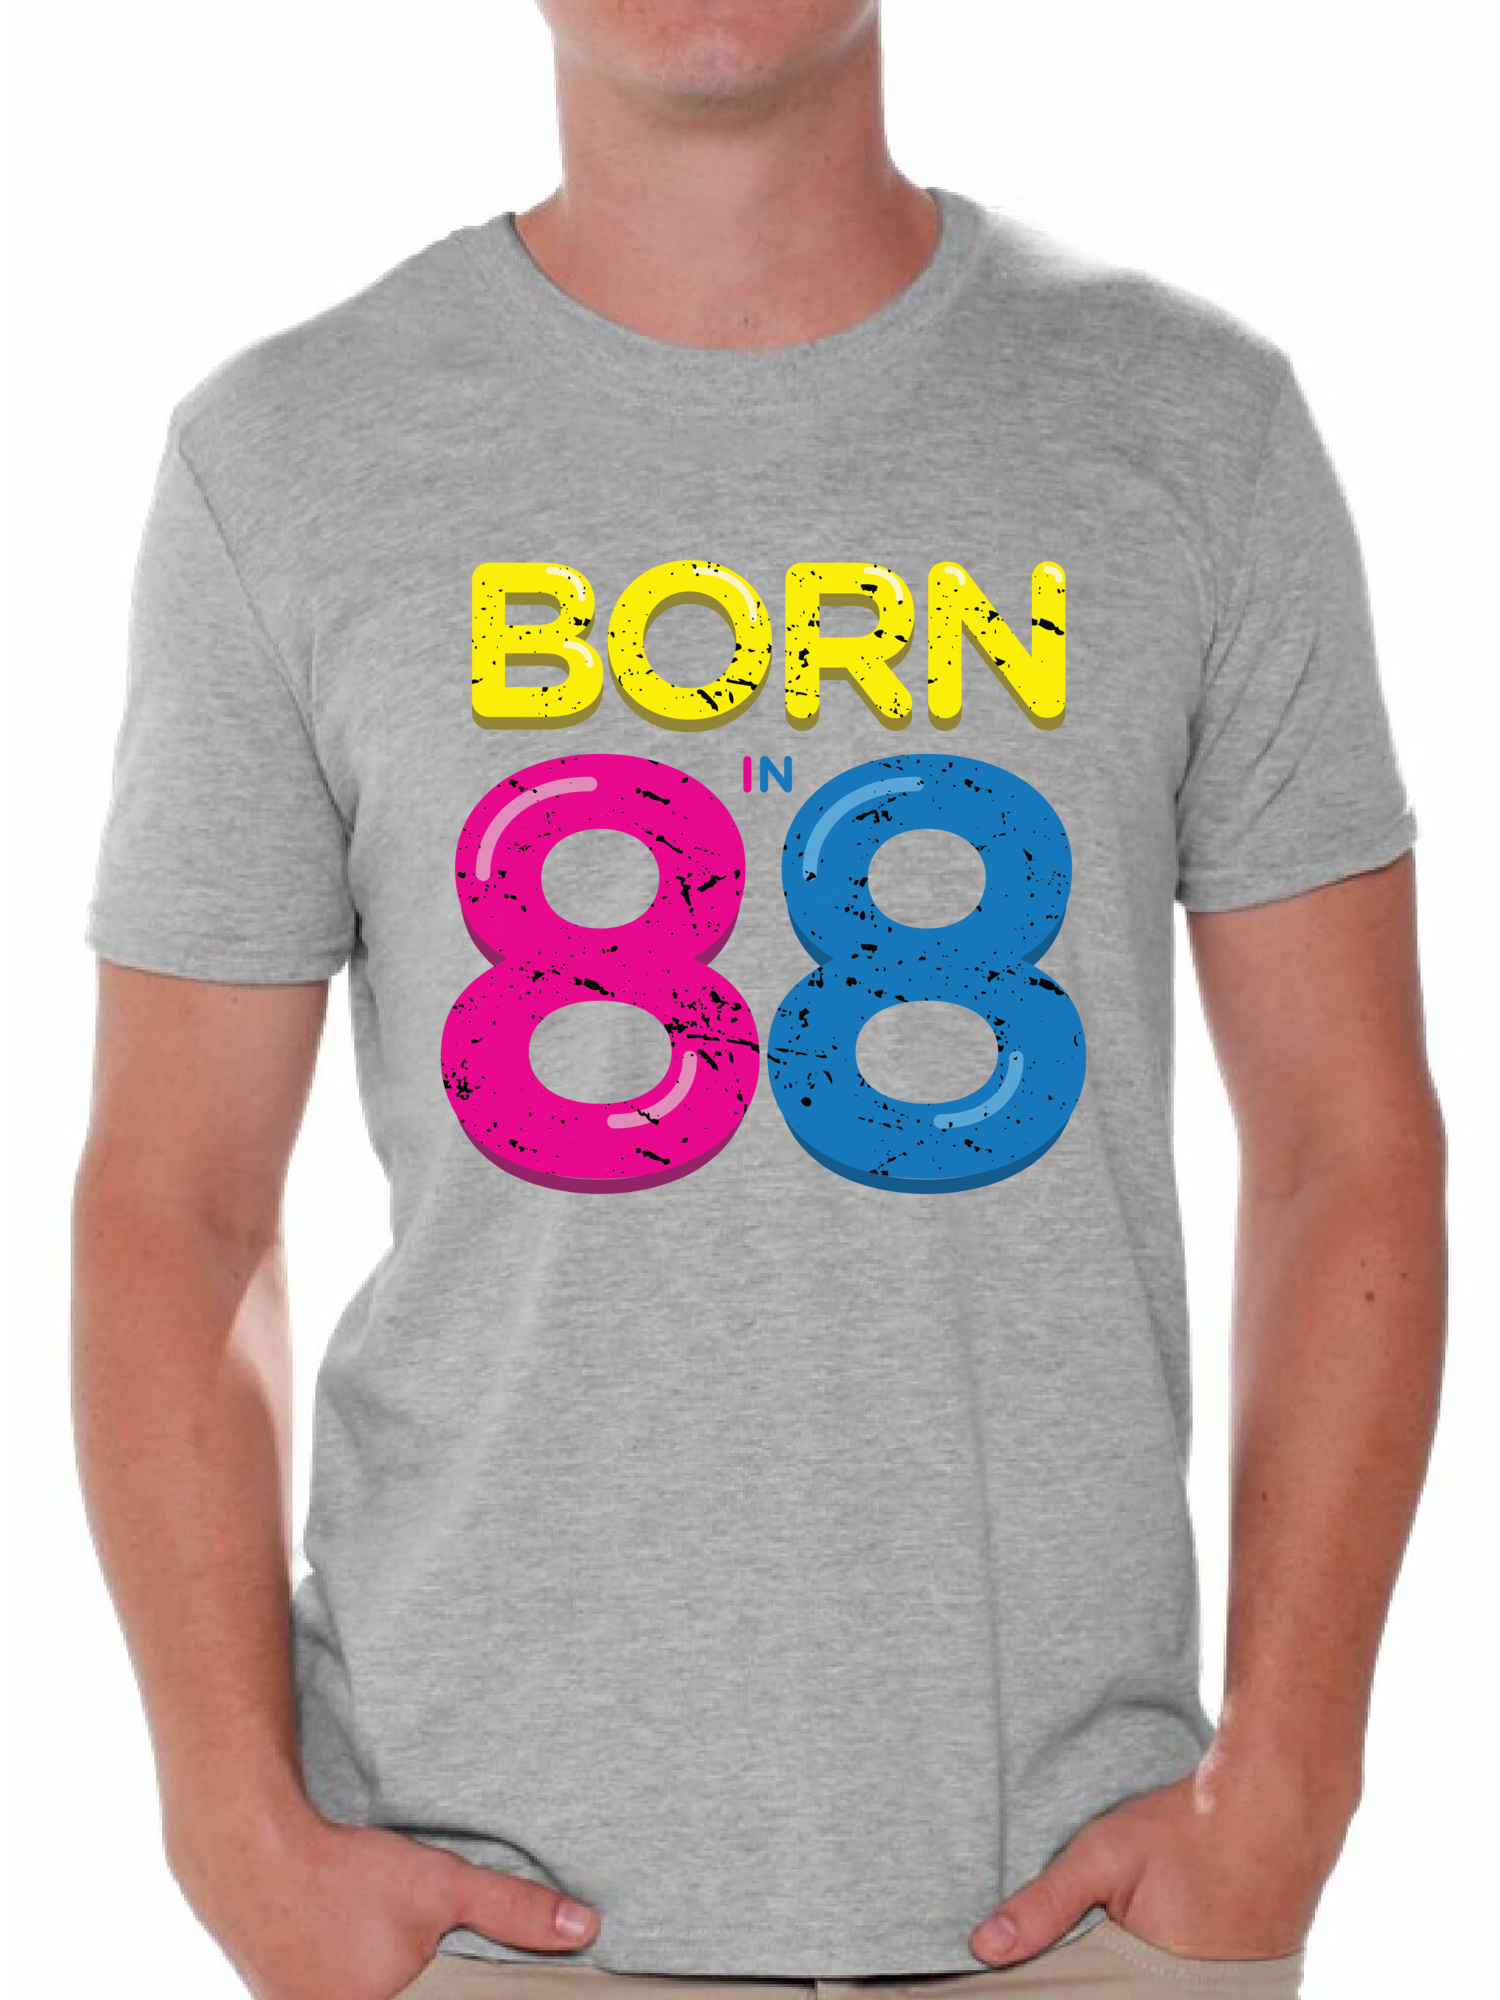 Awkward Styles Born In 88 Tshirt 30th Birthday Party Outfit for Men Funny Thirty Shirts Mens 30th Tshirt B-Day Party for Men 88 Shirt Born in 1988 Funny Birthday Shirts for Men 30th Birthday Shirt - image 1 of 4